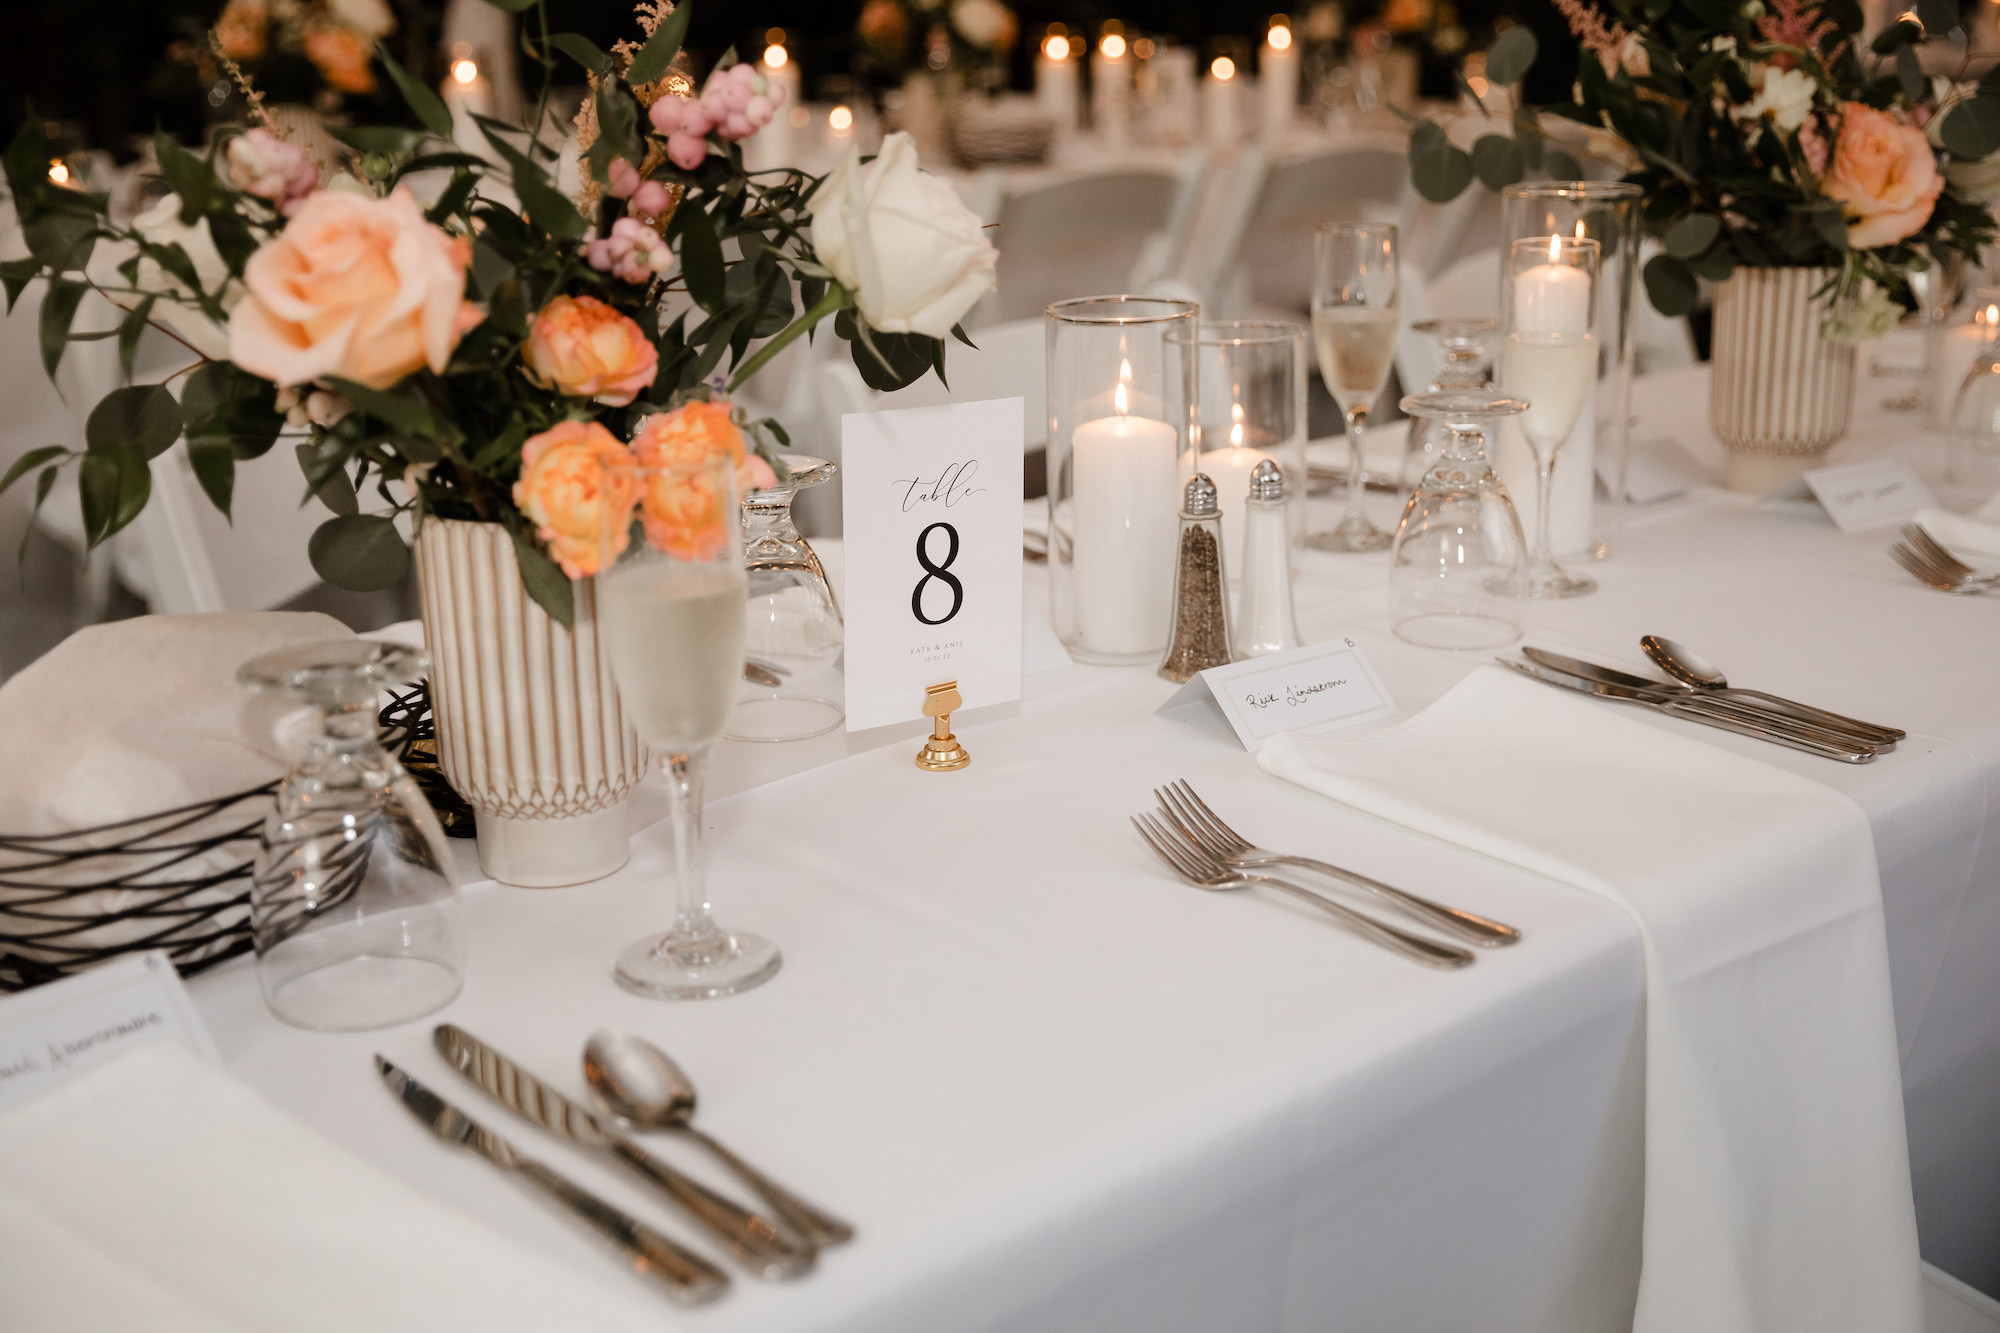 Orange and White Roses and Carnations with Ruscus and Eucalyptus Greenery Wedding Reception Centerpiece Ideas | Classic Table Number Signs